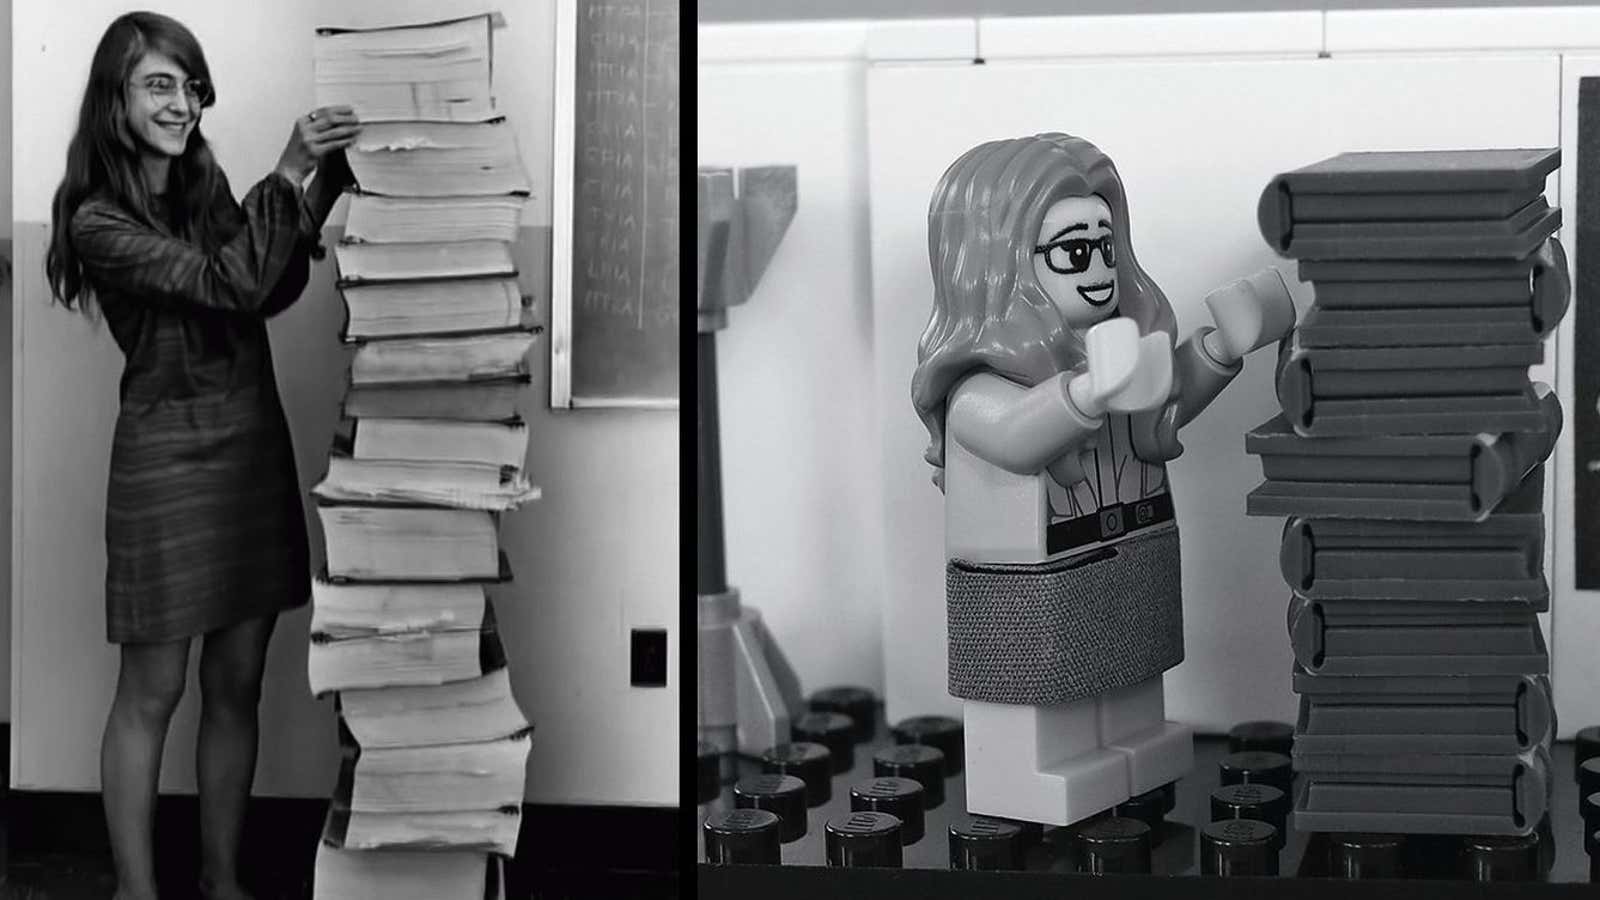 The real Hamilton next to the code she wrote for the Apollo mission (L), and Lego’s interpretation of the iconic photo.